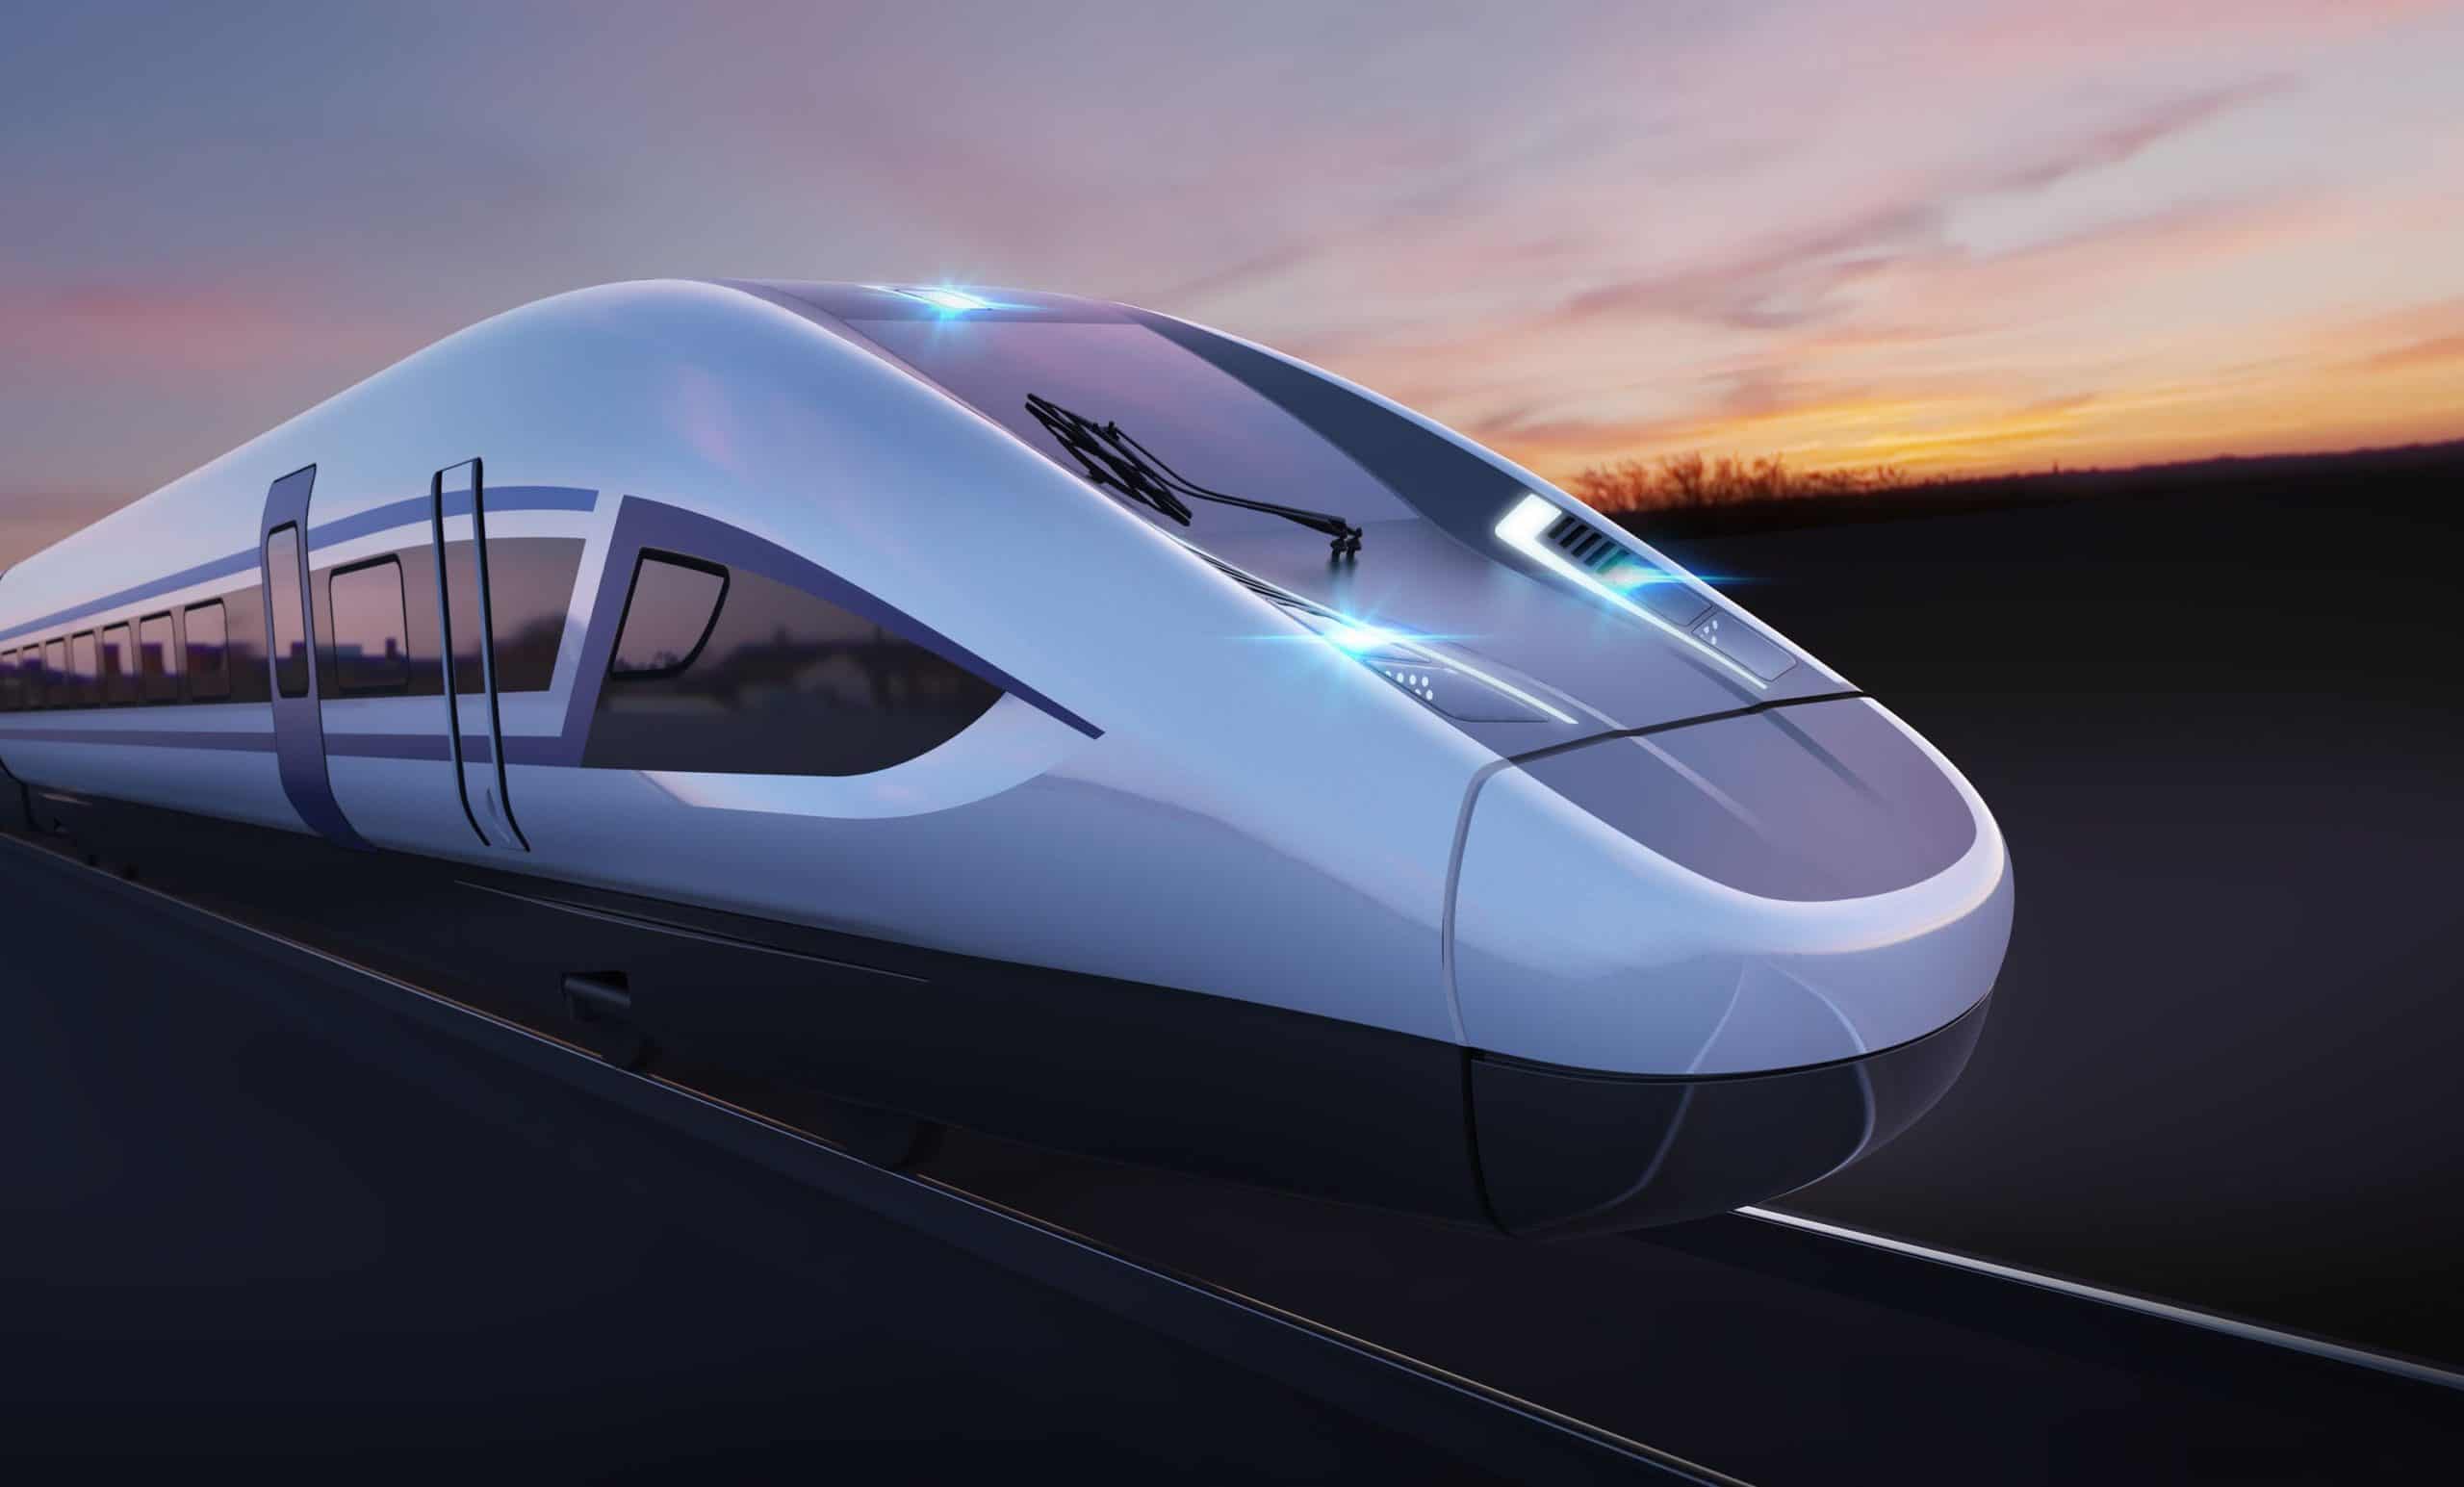 Northern MPs express anger as Government prepares to scrap Leeds leg of HS2